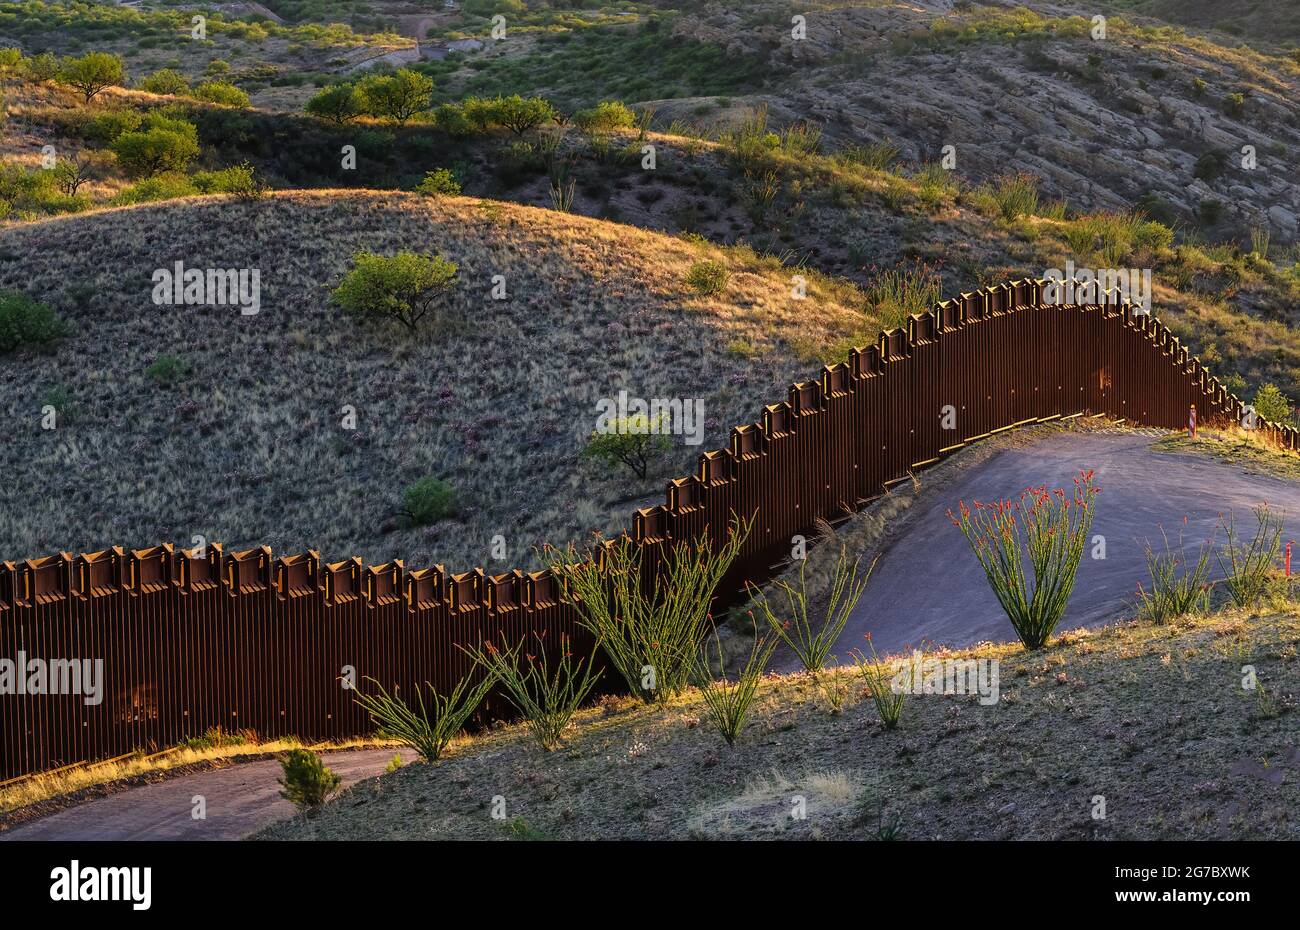 US border fence on the Mexico border, east of Nogales Arizona and Nogales Sonora Mexico, viewed from US side at sunset, looking southwest.This type of Stock Photo